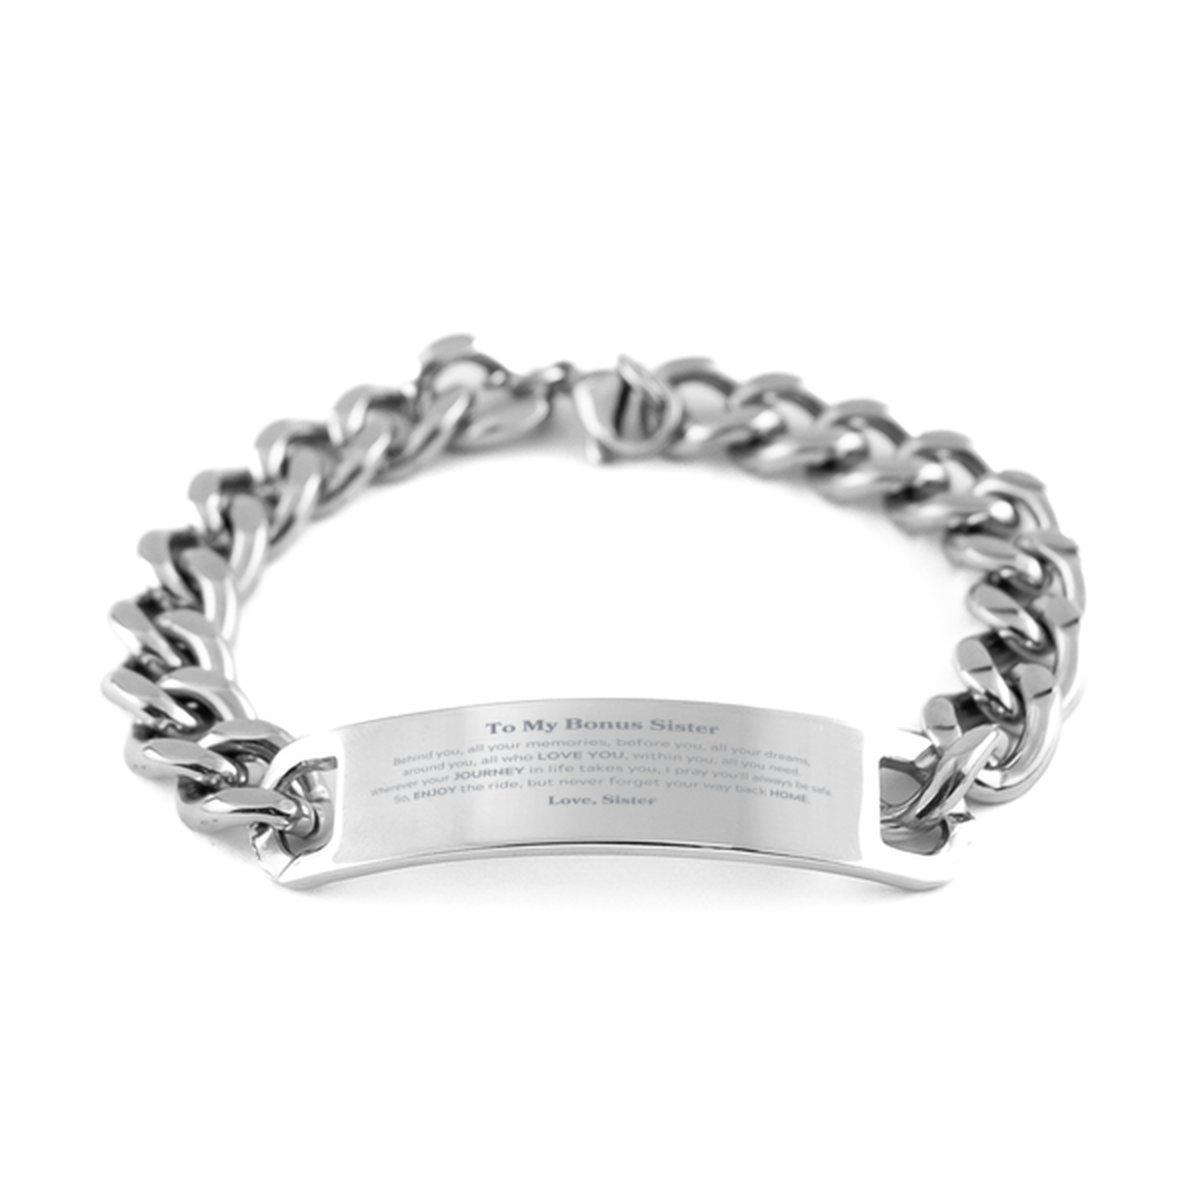 To My Bonus Sister Graduation Gifts from Sister, Bonus Sister Cuban Chain Stainless Steel Bracelet Christmas Birthday Gifts for Bonus Sister Behind you, all your memories, before you, all your dreams. Love, Sister